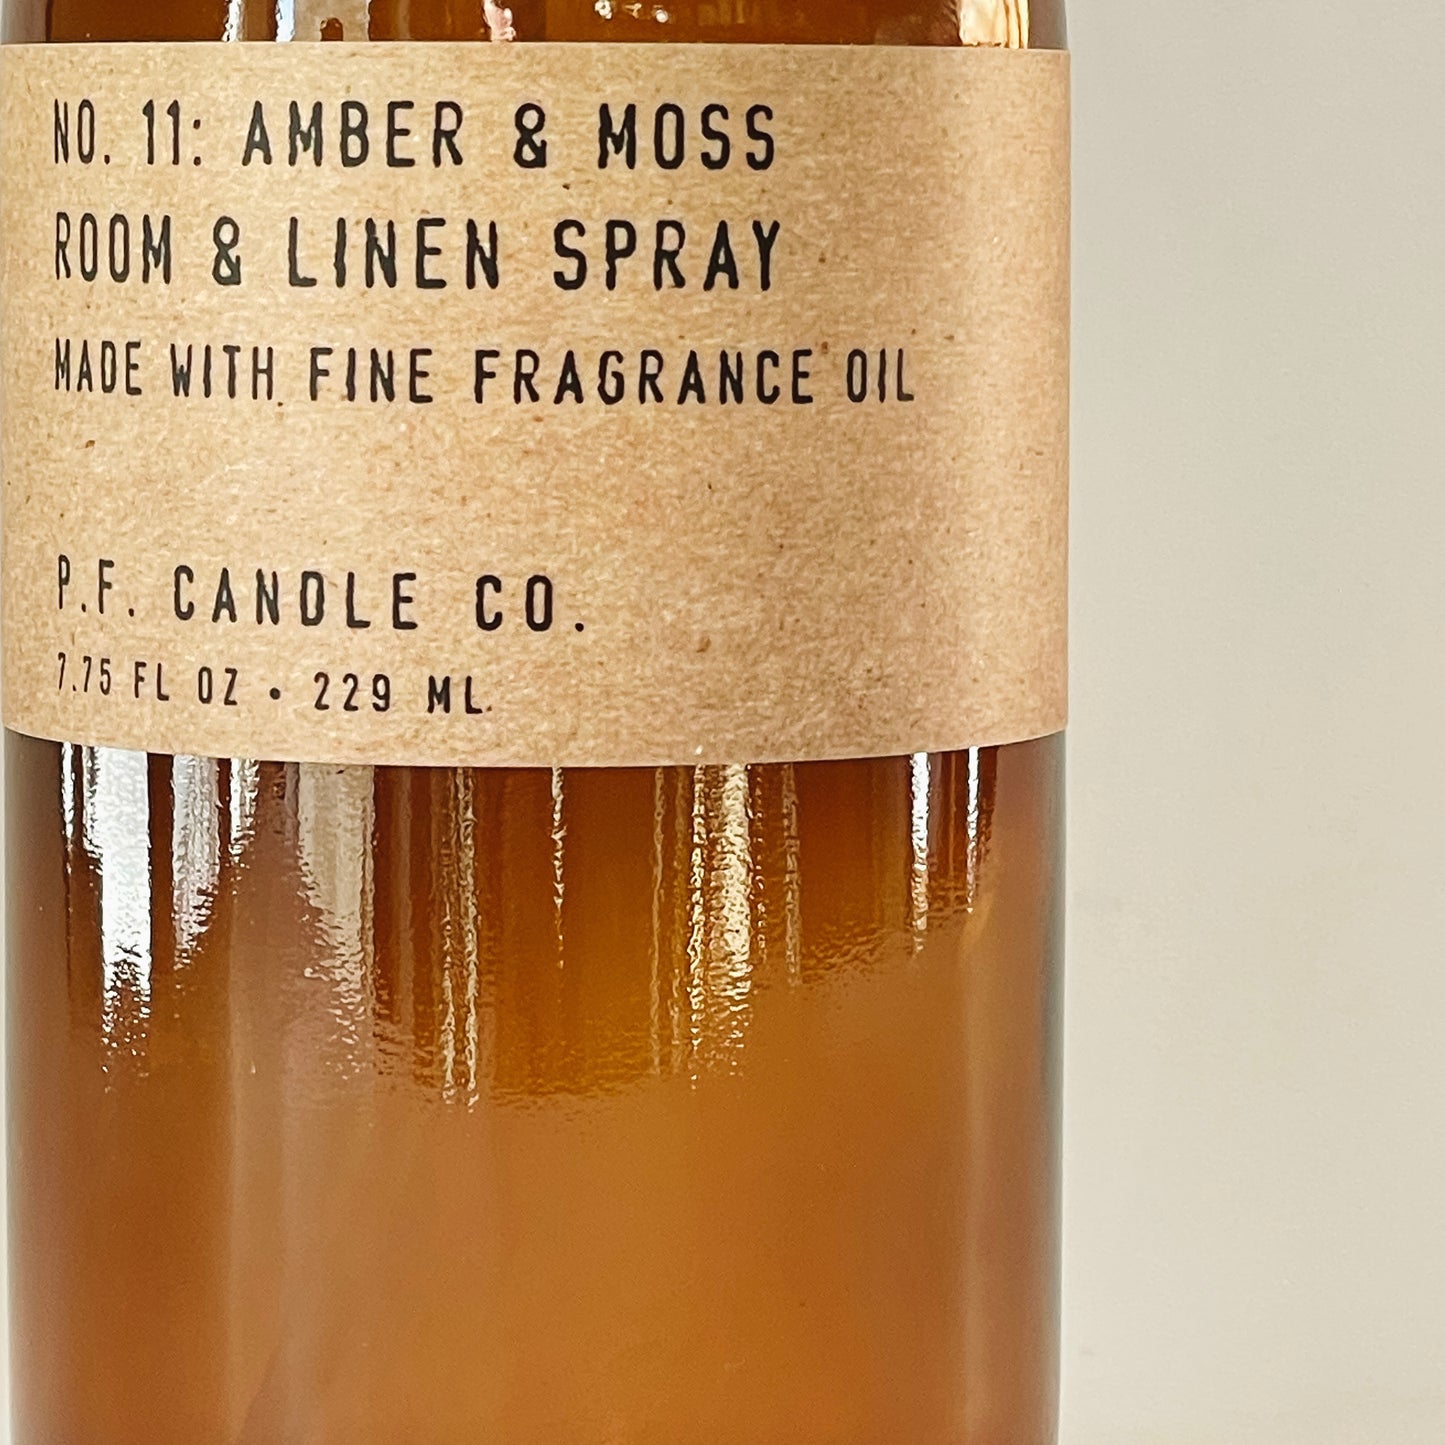 P.F. Candle Co. Room & Linen Spray | Amber & Moss